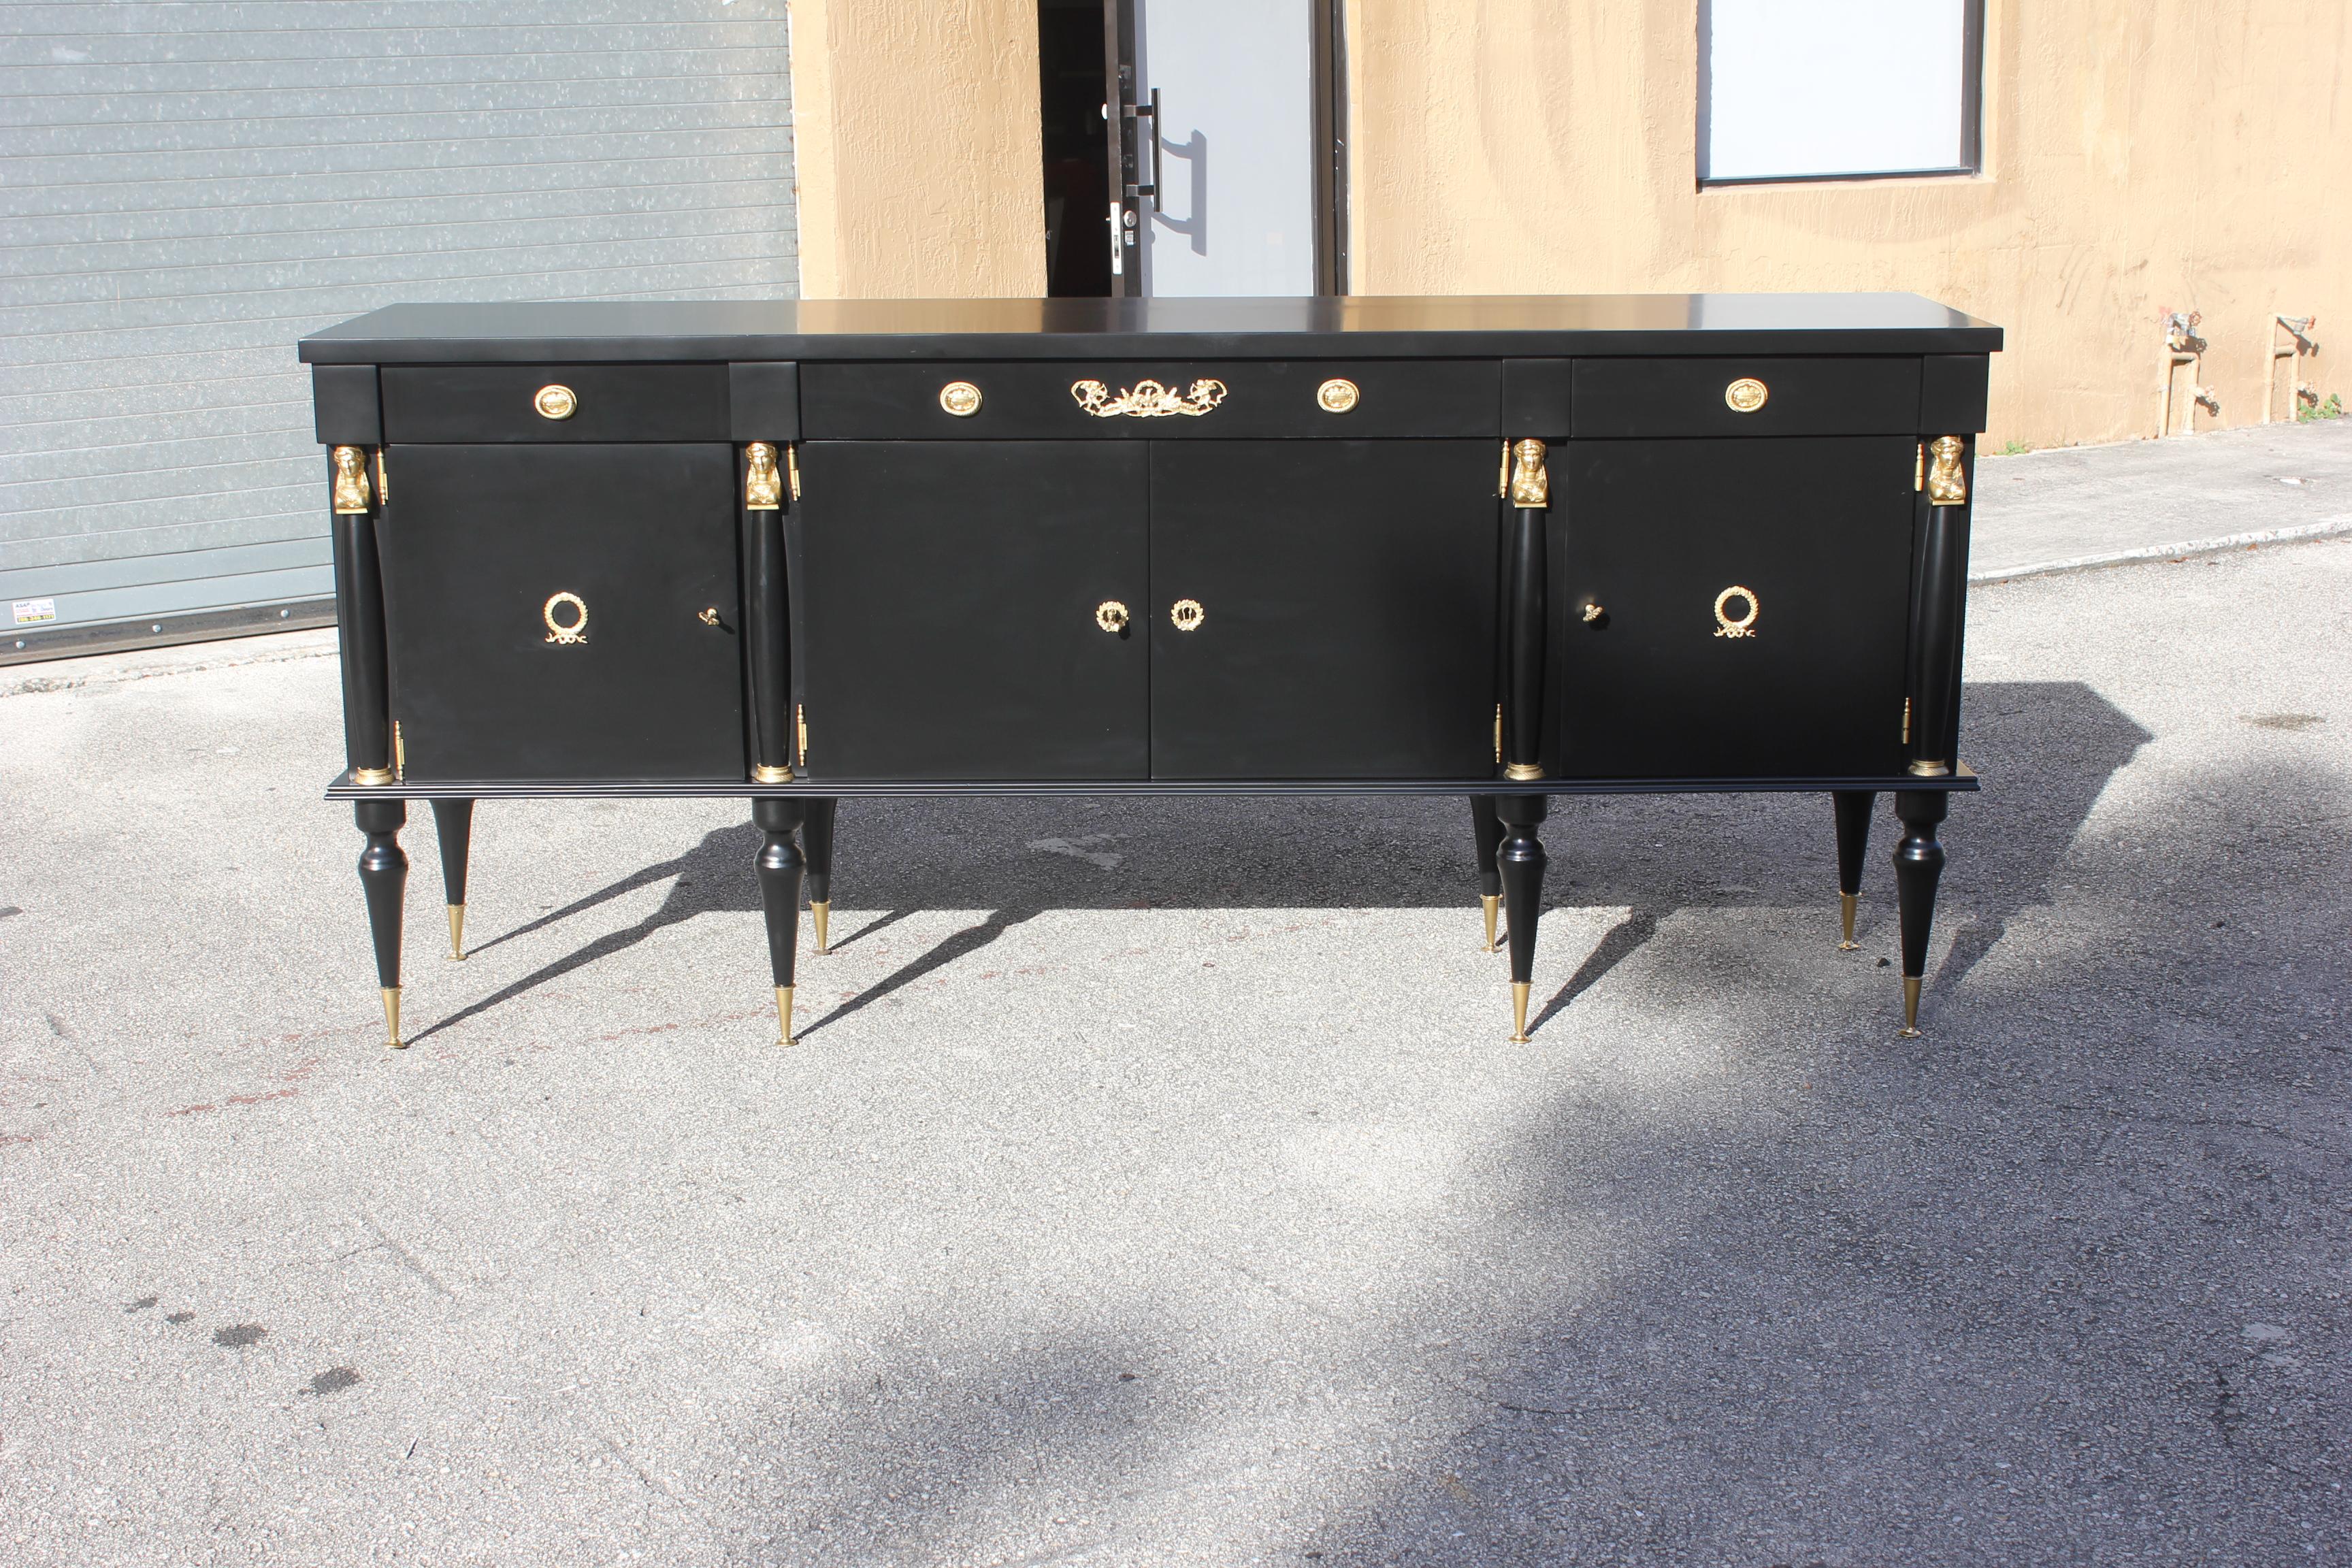 Long French Empire Style Antique Sideboard or Buffet, circa 1920s (Frühes 20. Jahrhundert)